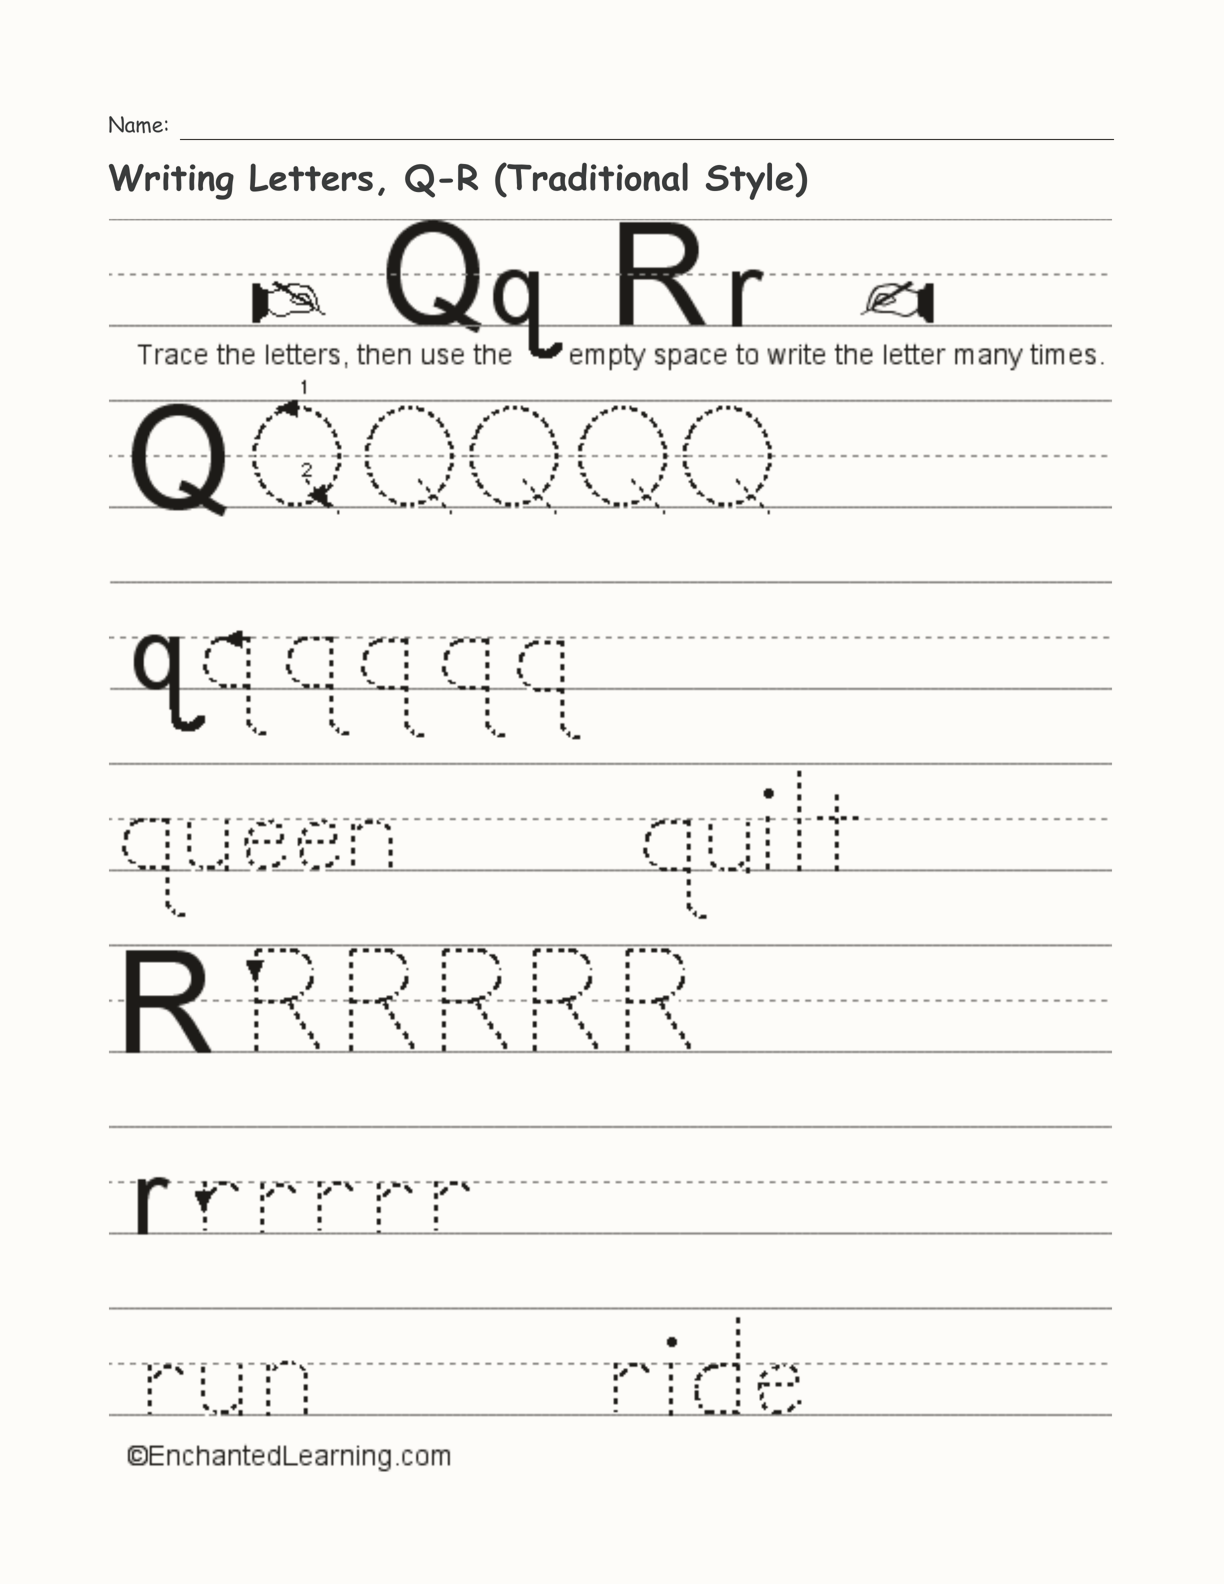 Writing Letters, Q-R (Traditional Style) interactive worksheet page 1